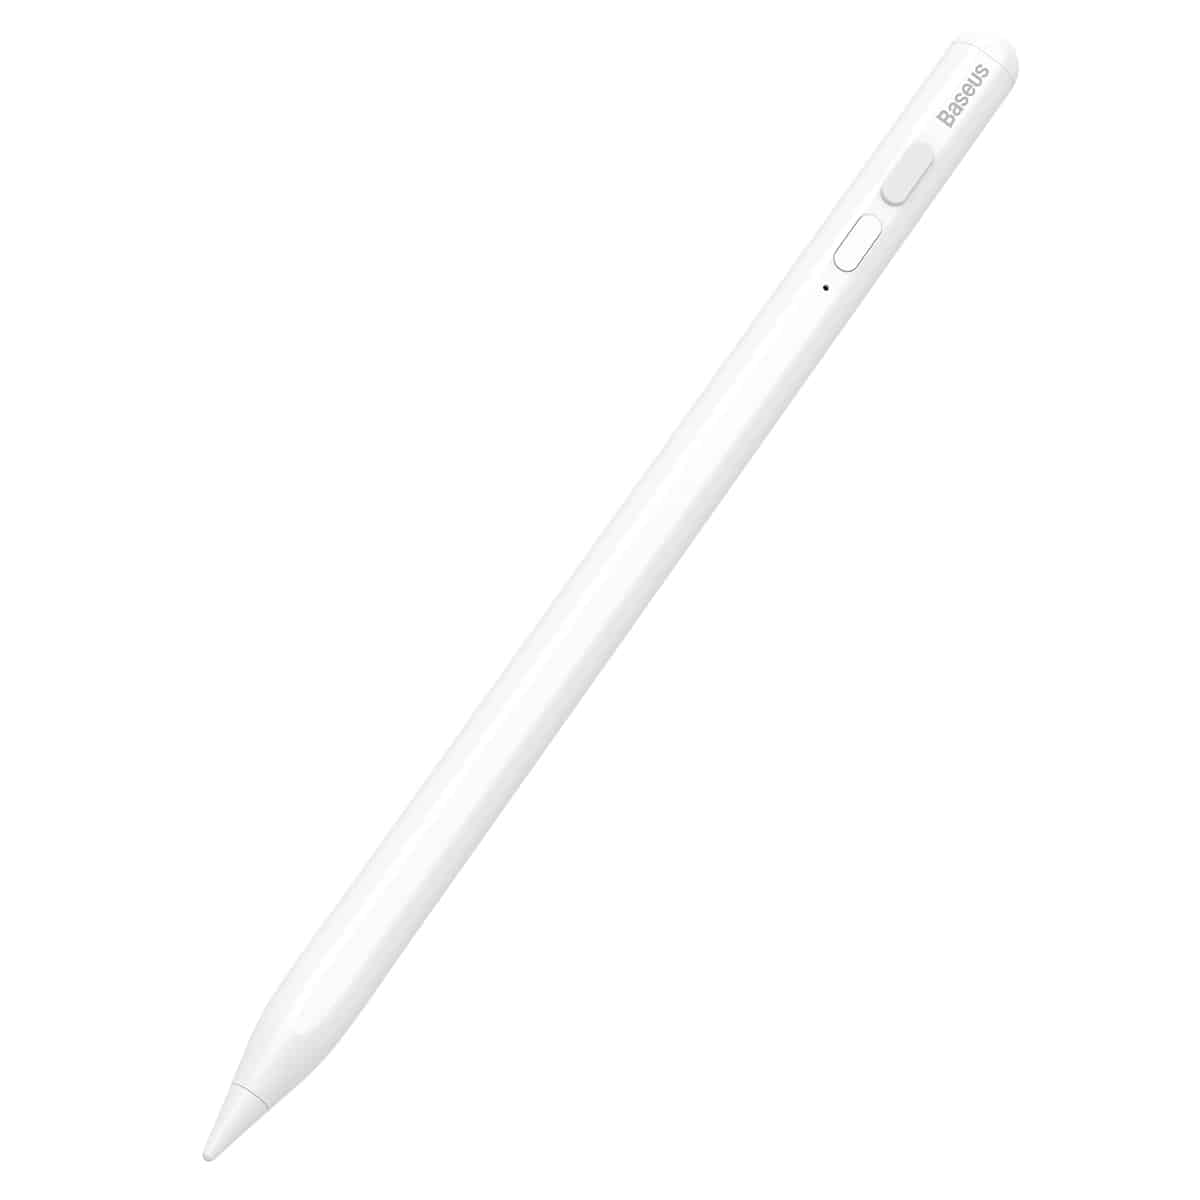 Baseus Penchang Capacitive Handwriting Pen (Active Version+Anti Misoperation) White (Including: Simple Universal Data Cable Type-c 3A 0.5m White*1+Active Head*1)